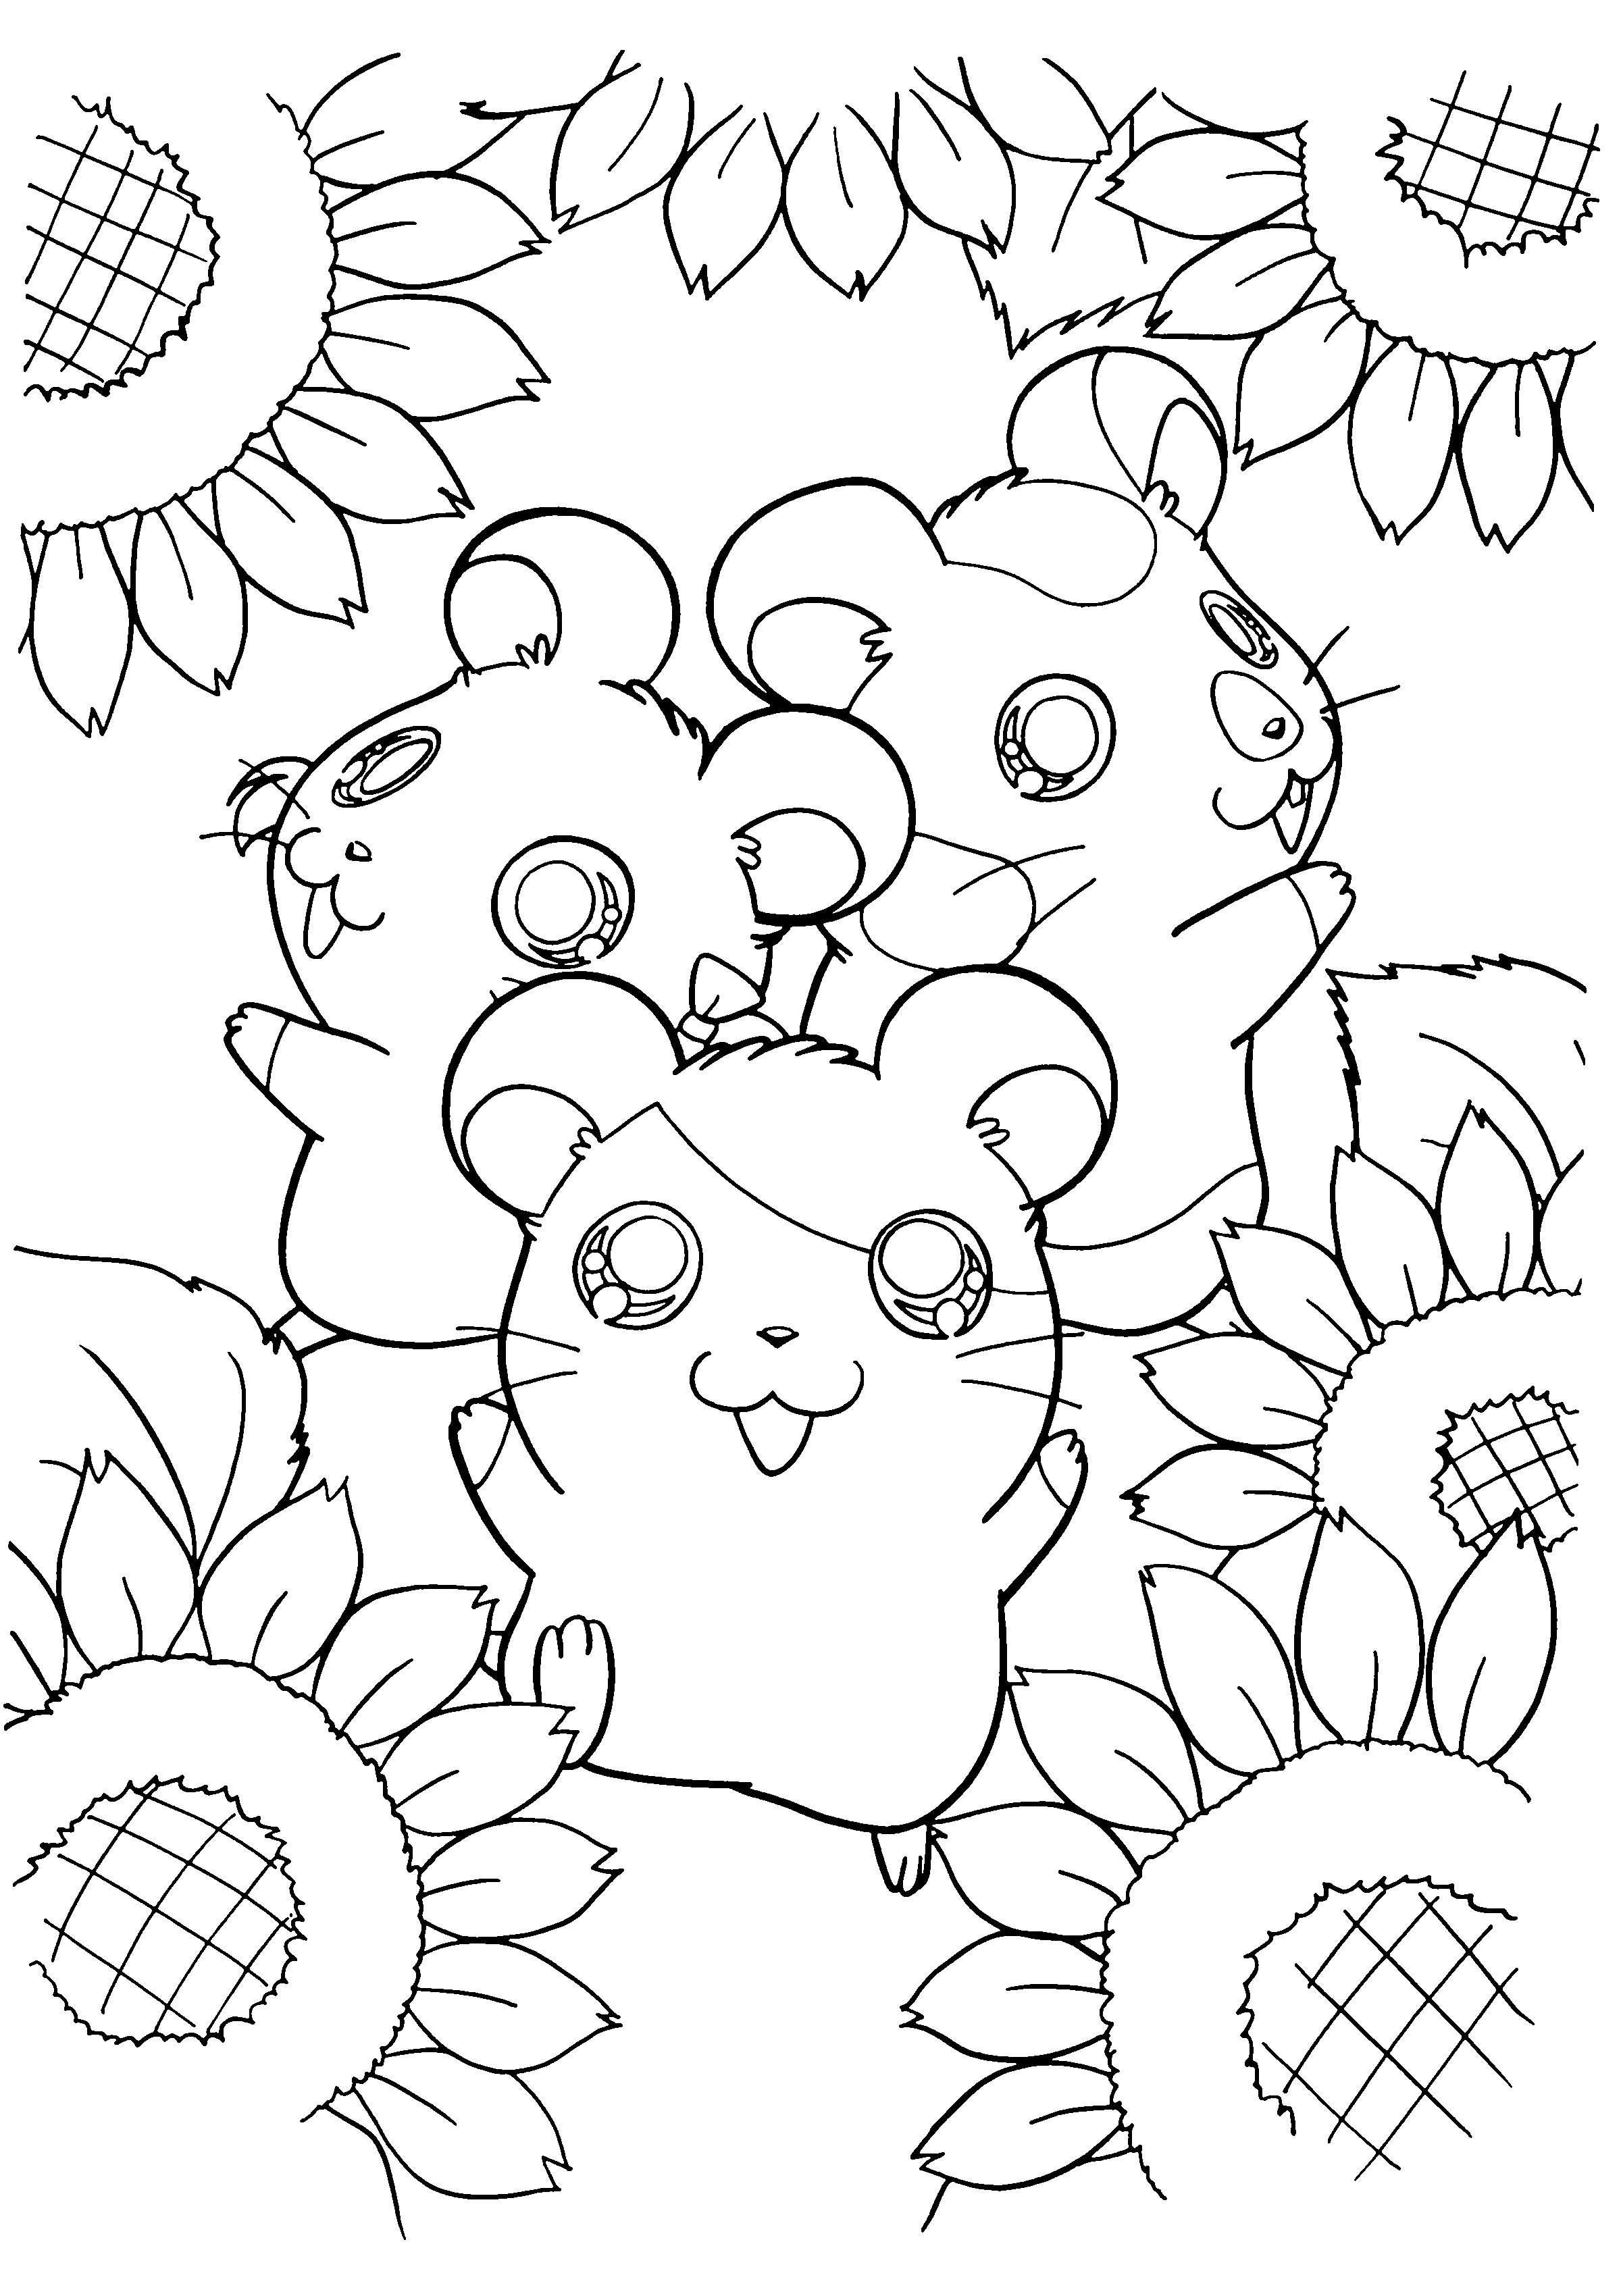 Hamster Coloring Pages - Best Coloring Pages For Kids